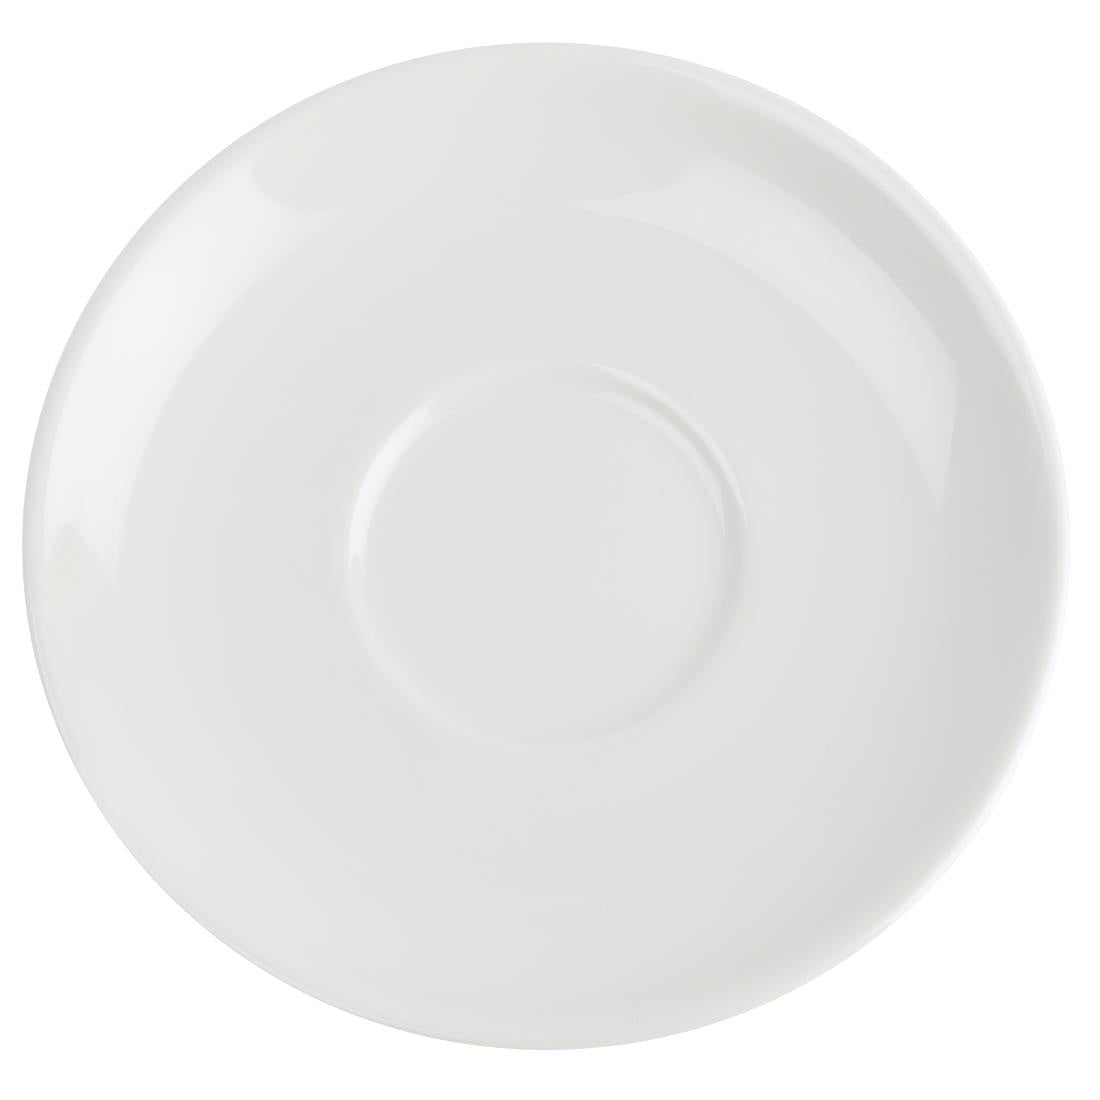 CG035 Royal Porcelain Classic White Tea Cup Saucers 150mm (Pack of 12)